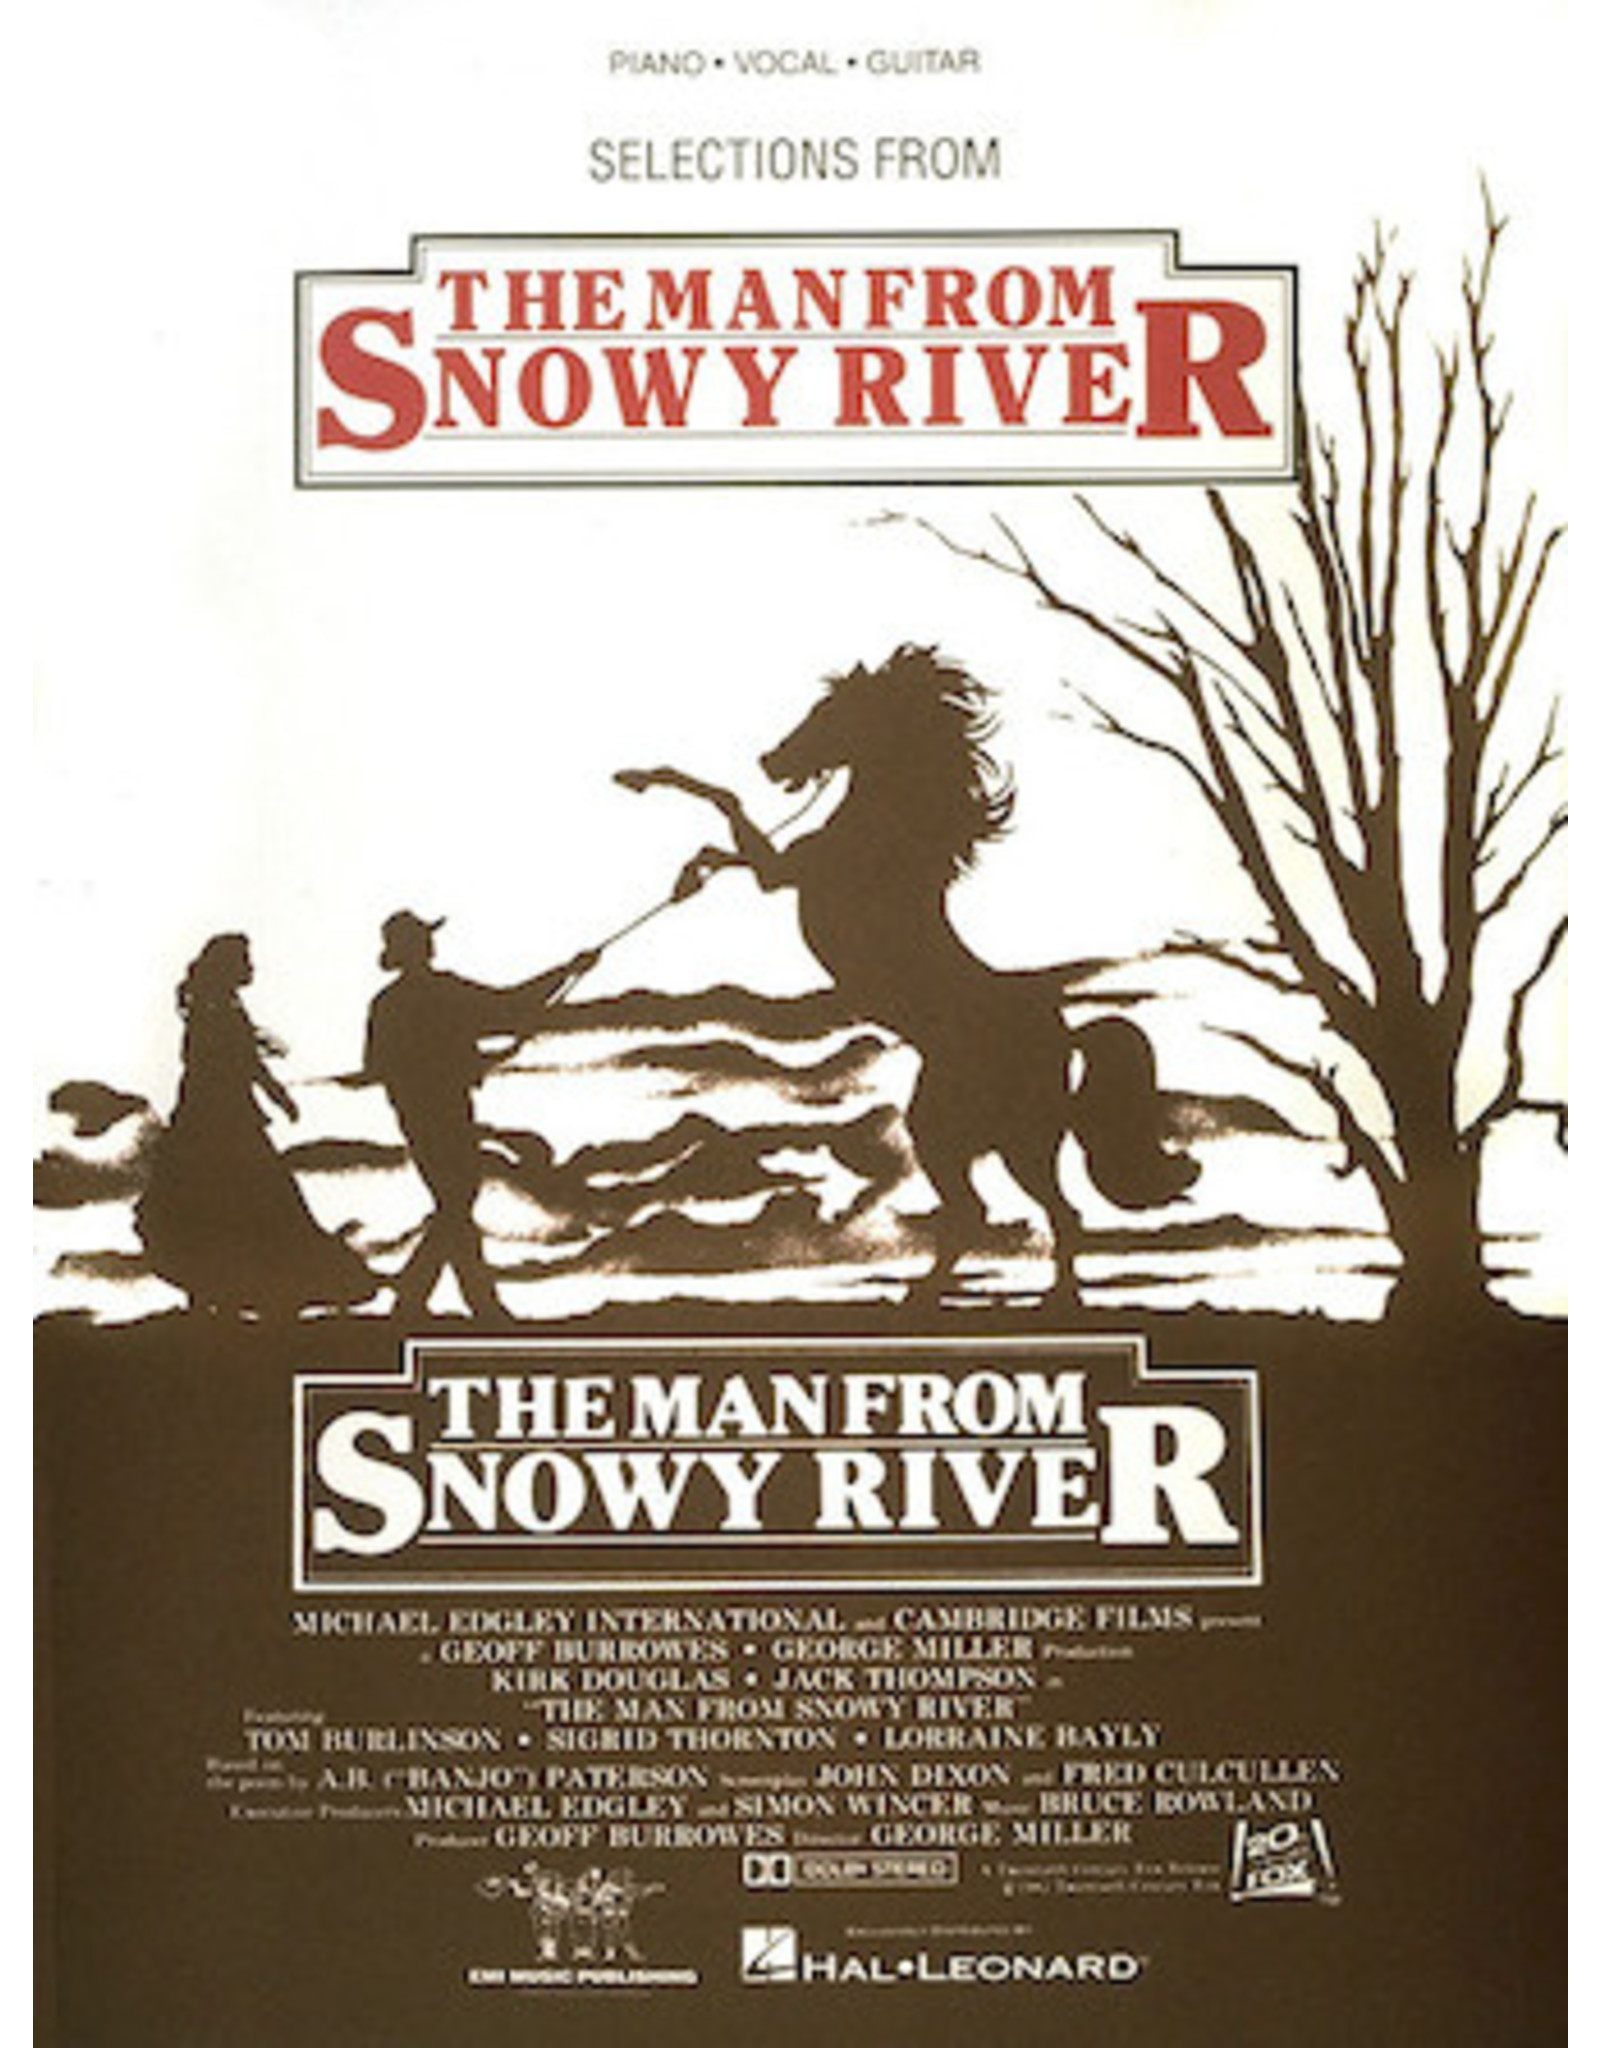 Hal Leonard Man From Snowy River - Selections from the Movie by Bruce Rowland